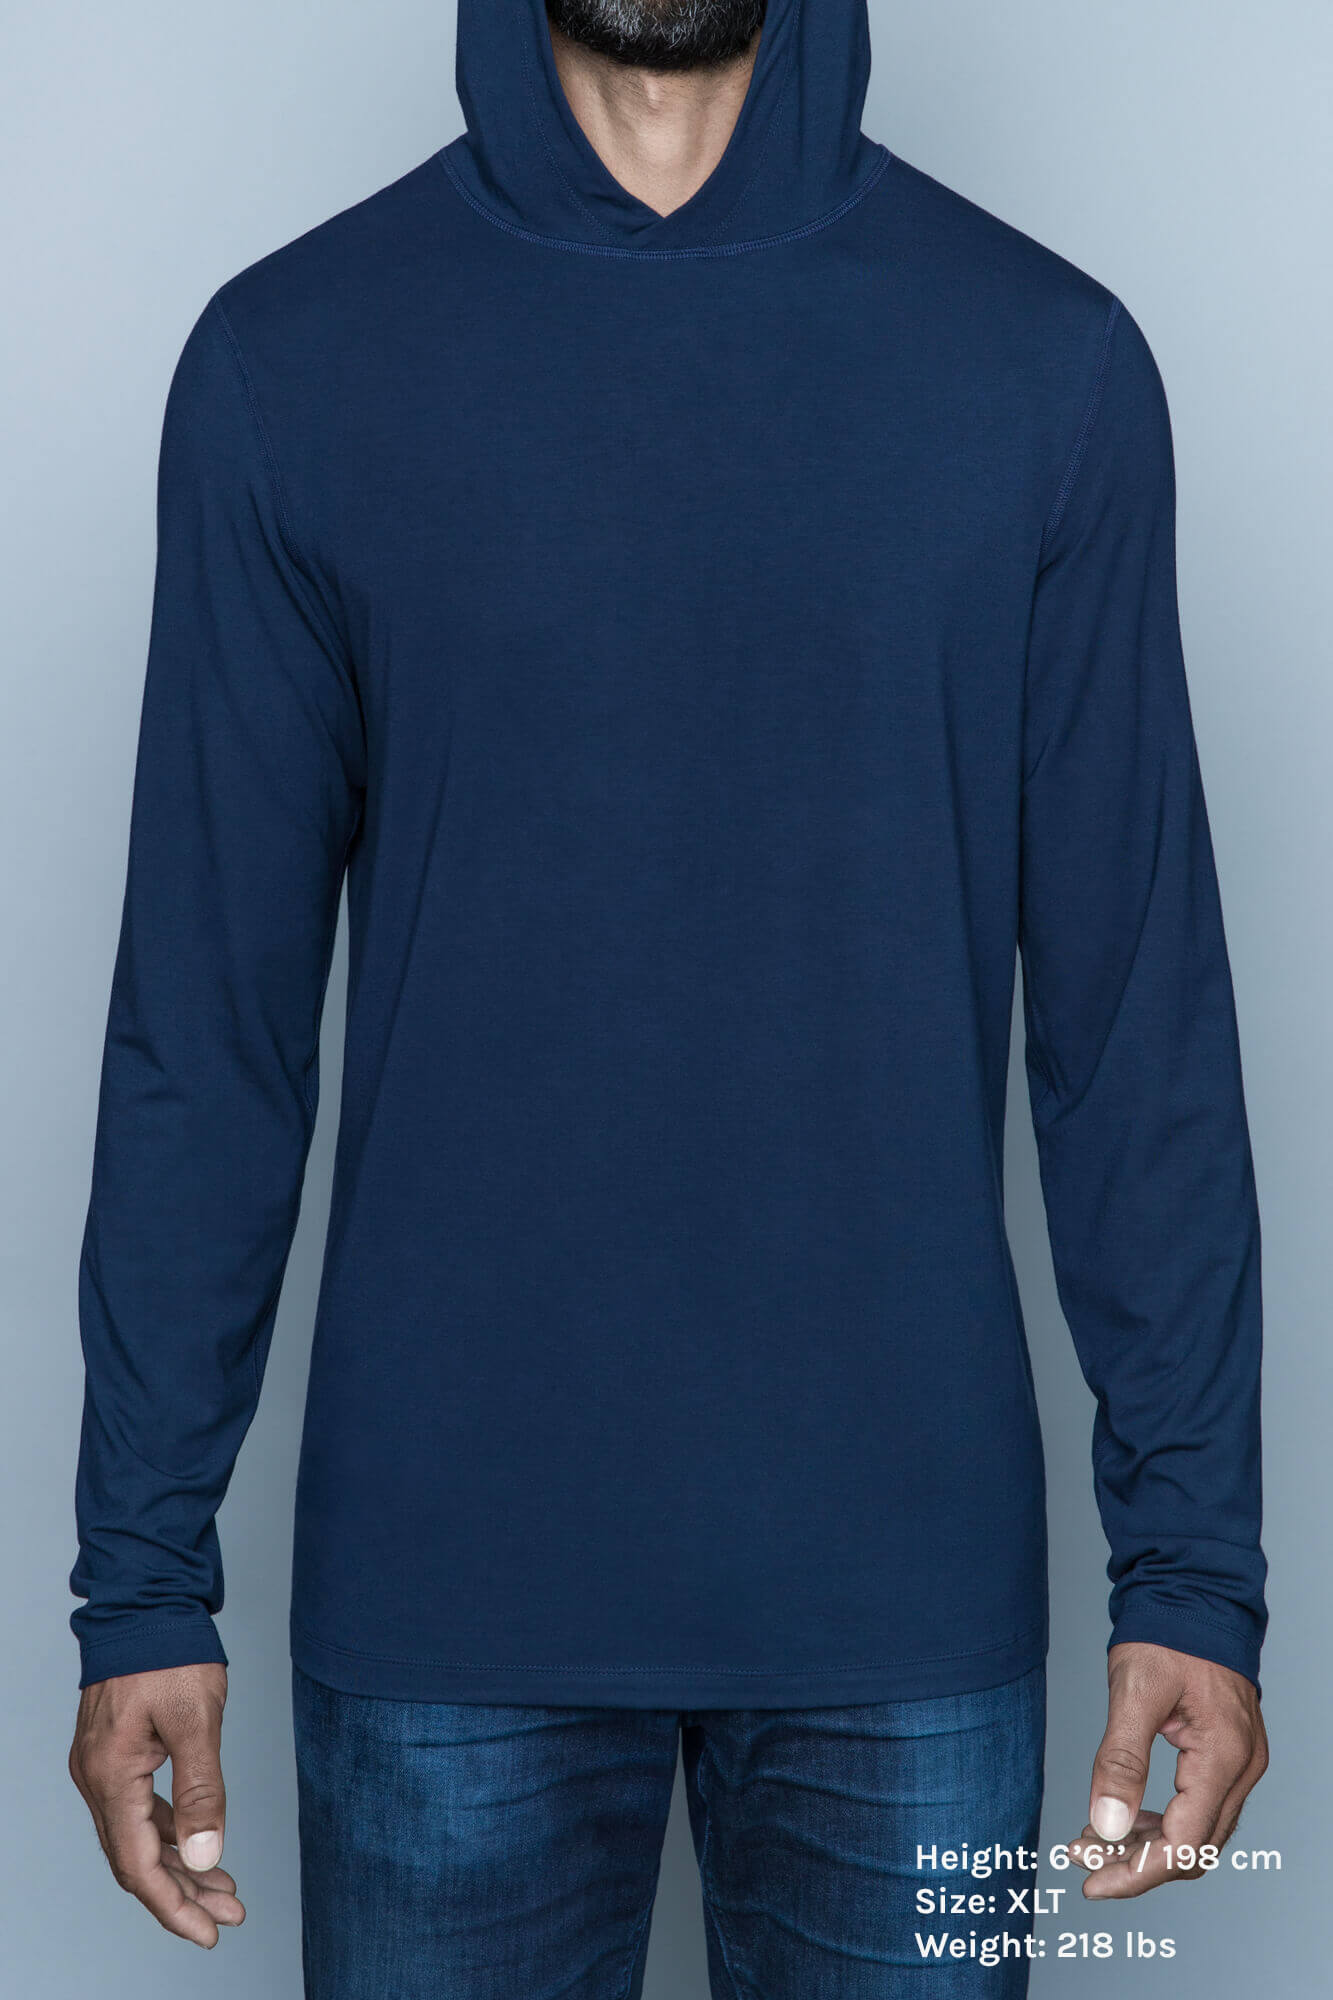 The Navas Lab Vasquez long-sleeve hooded shirt for tall guys in blue. The perfect tall slim shirt for tall and slim guys looking for style and comfort.